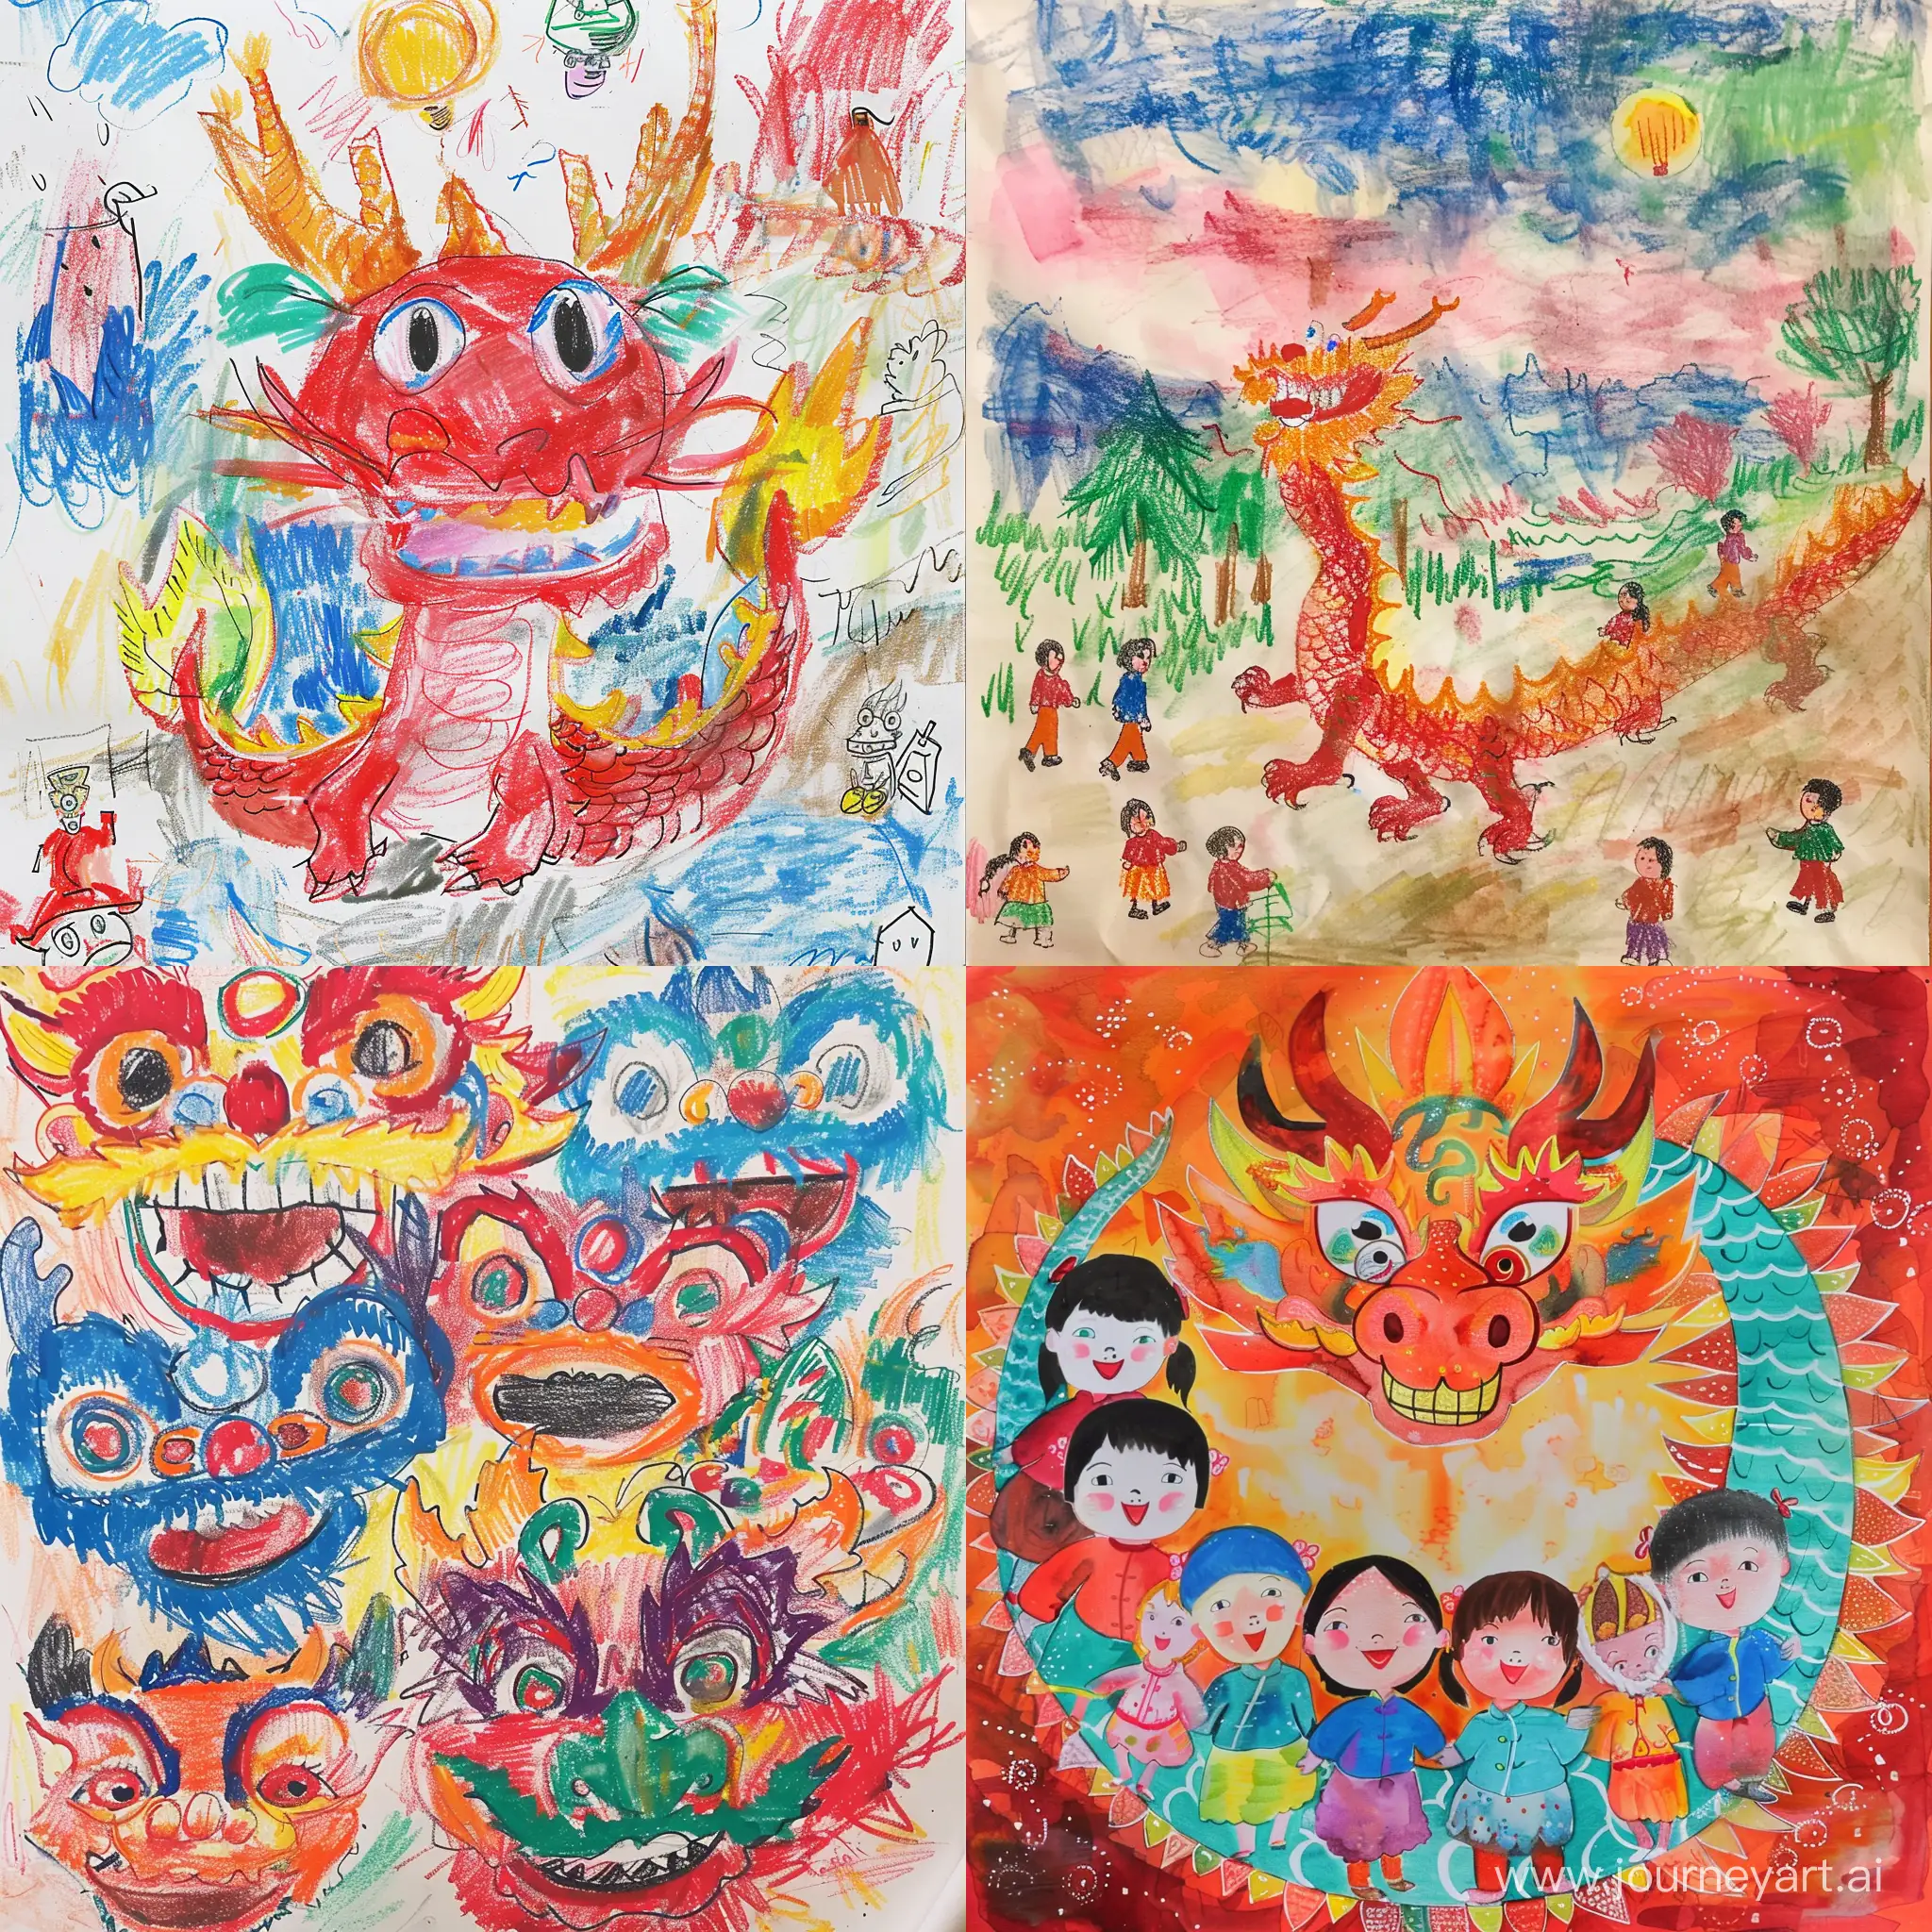 Children's drawings, the Year of the Dragon, celebrating the New Year for an elementary school named Moxian. --v 6 --ar 1:1 --no 23572